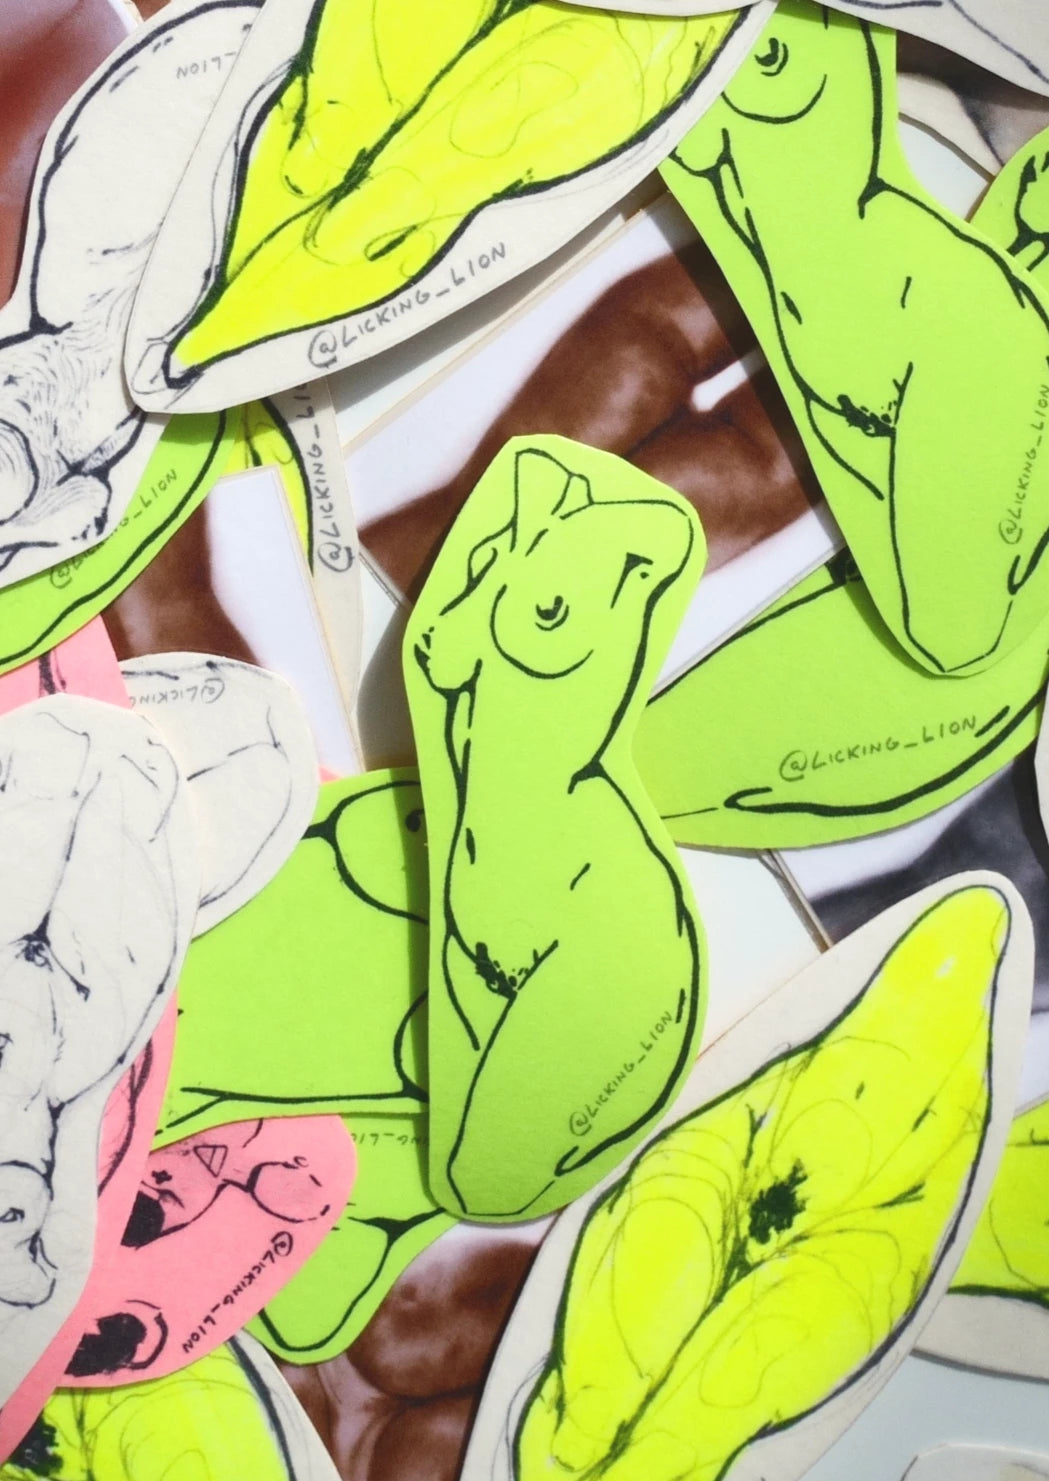 "Create your own handmade, sensual stickers" Nude Art Sticker Workshop with Tobias in Cologne, Germany